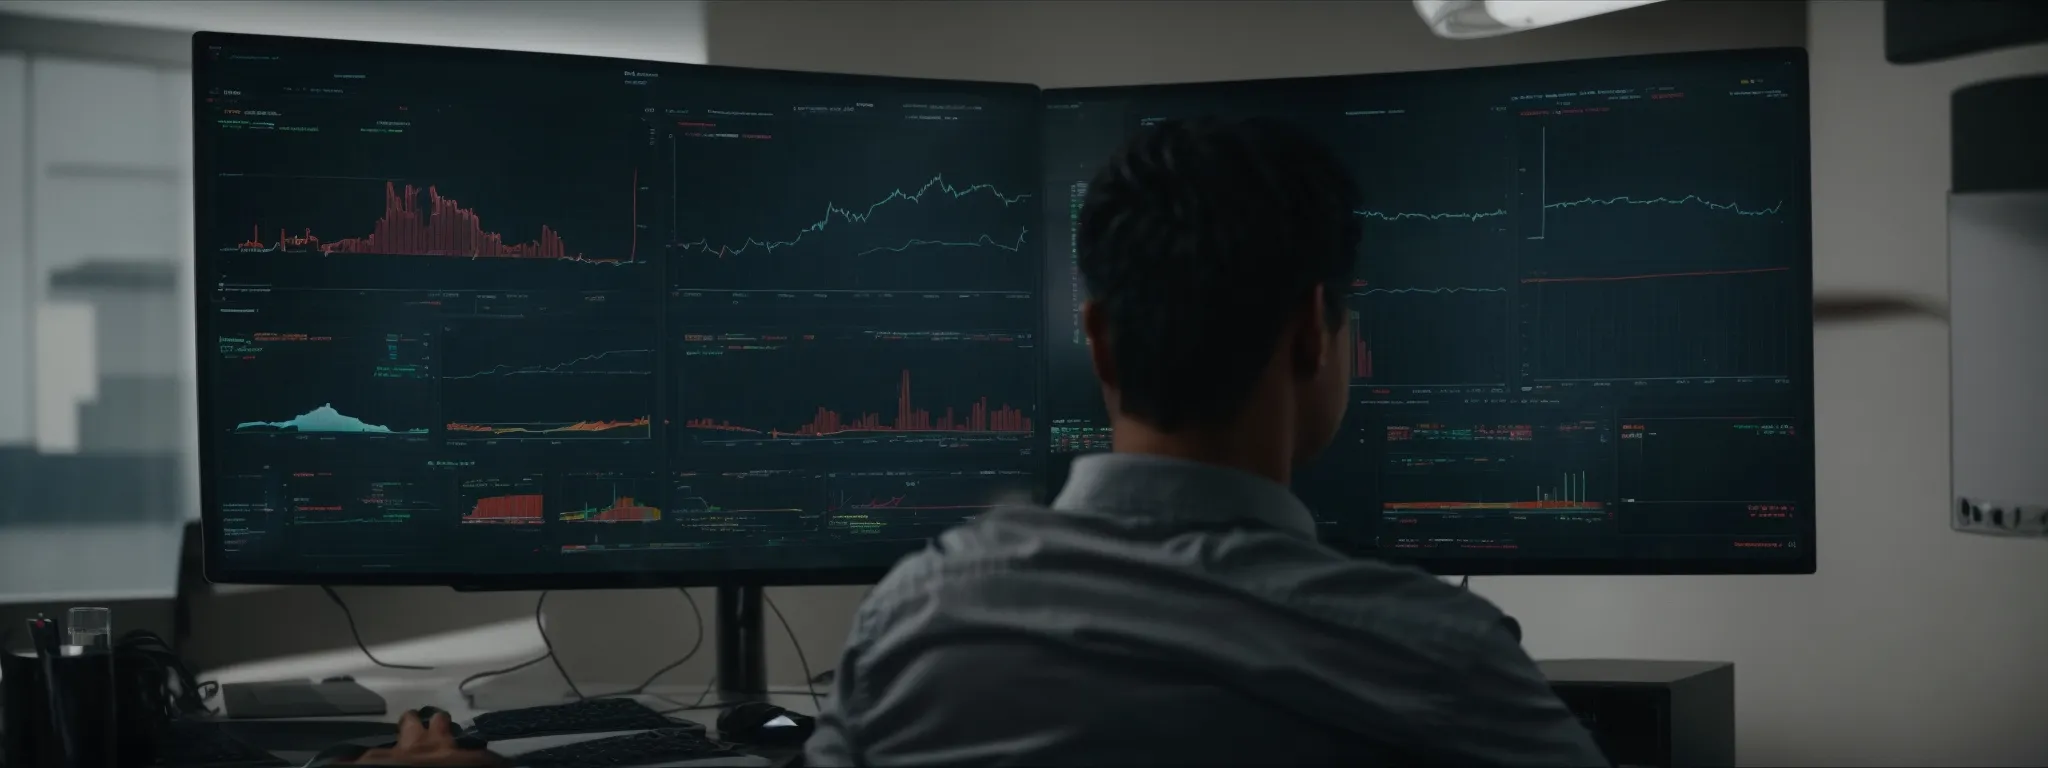 a person sits in front of a large monitor displaying a complex analytics dashboard while adjusting a strategy document on their desk.